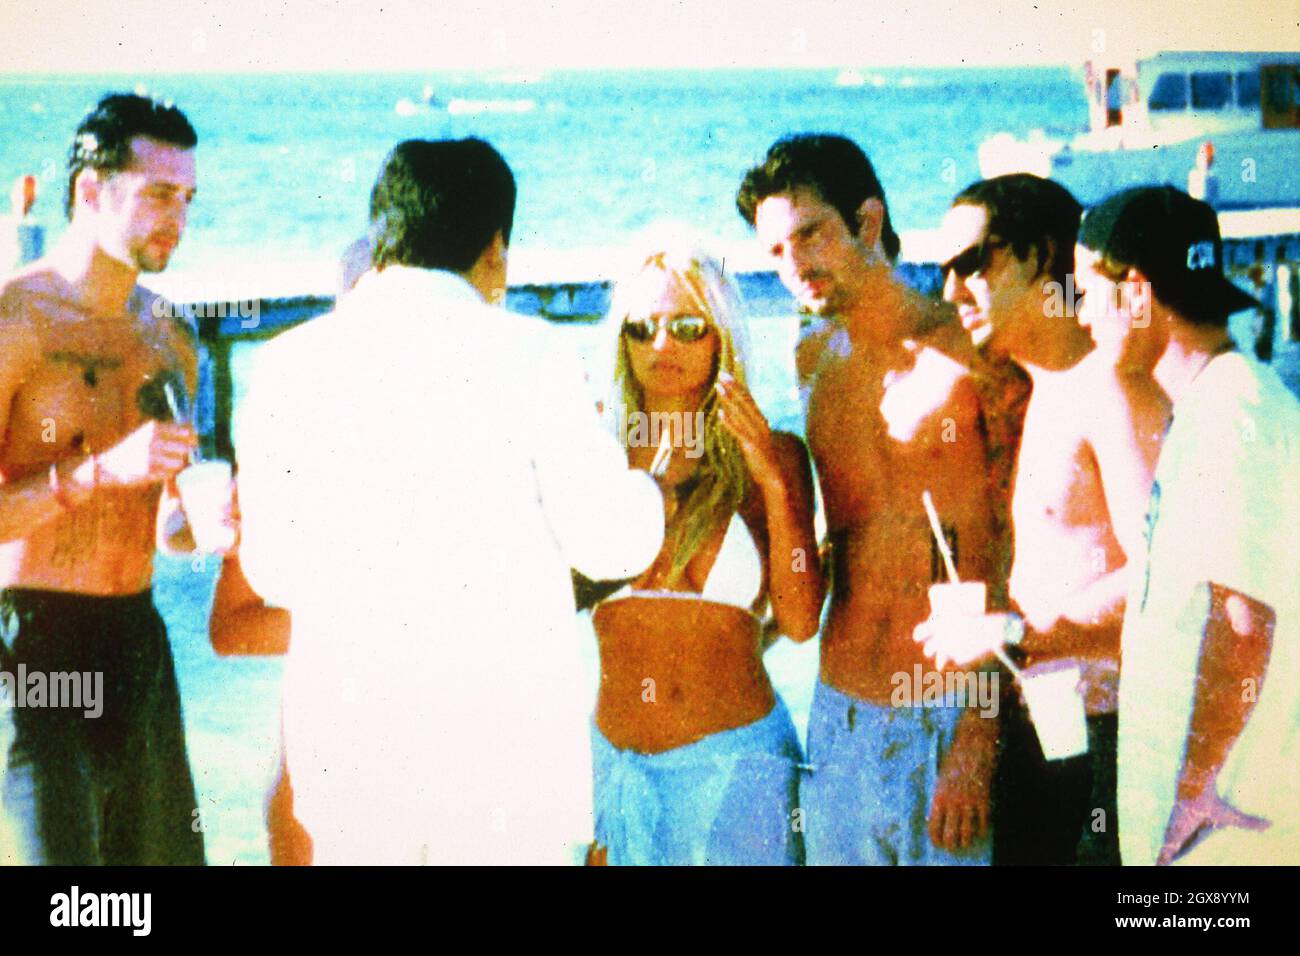 Pamela Anderson and Tommy Lee's Wedding on a beach in Hawaii on 19 February  1995 Stock Photo - Alamy